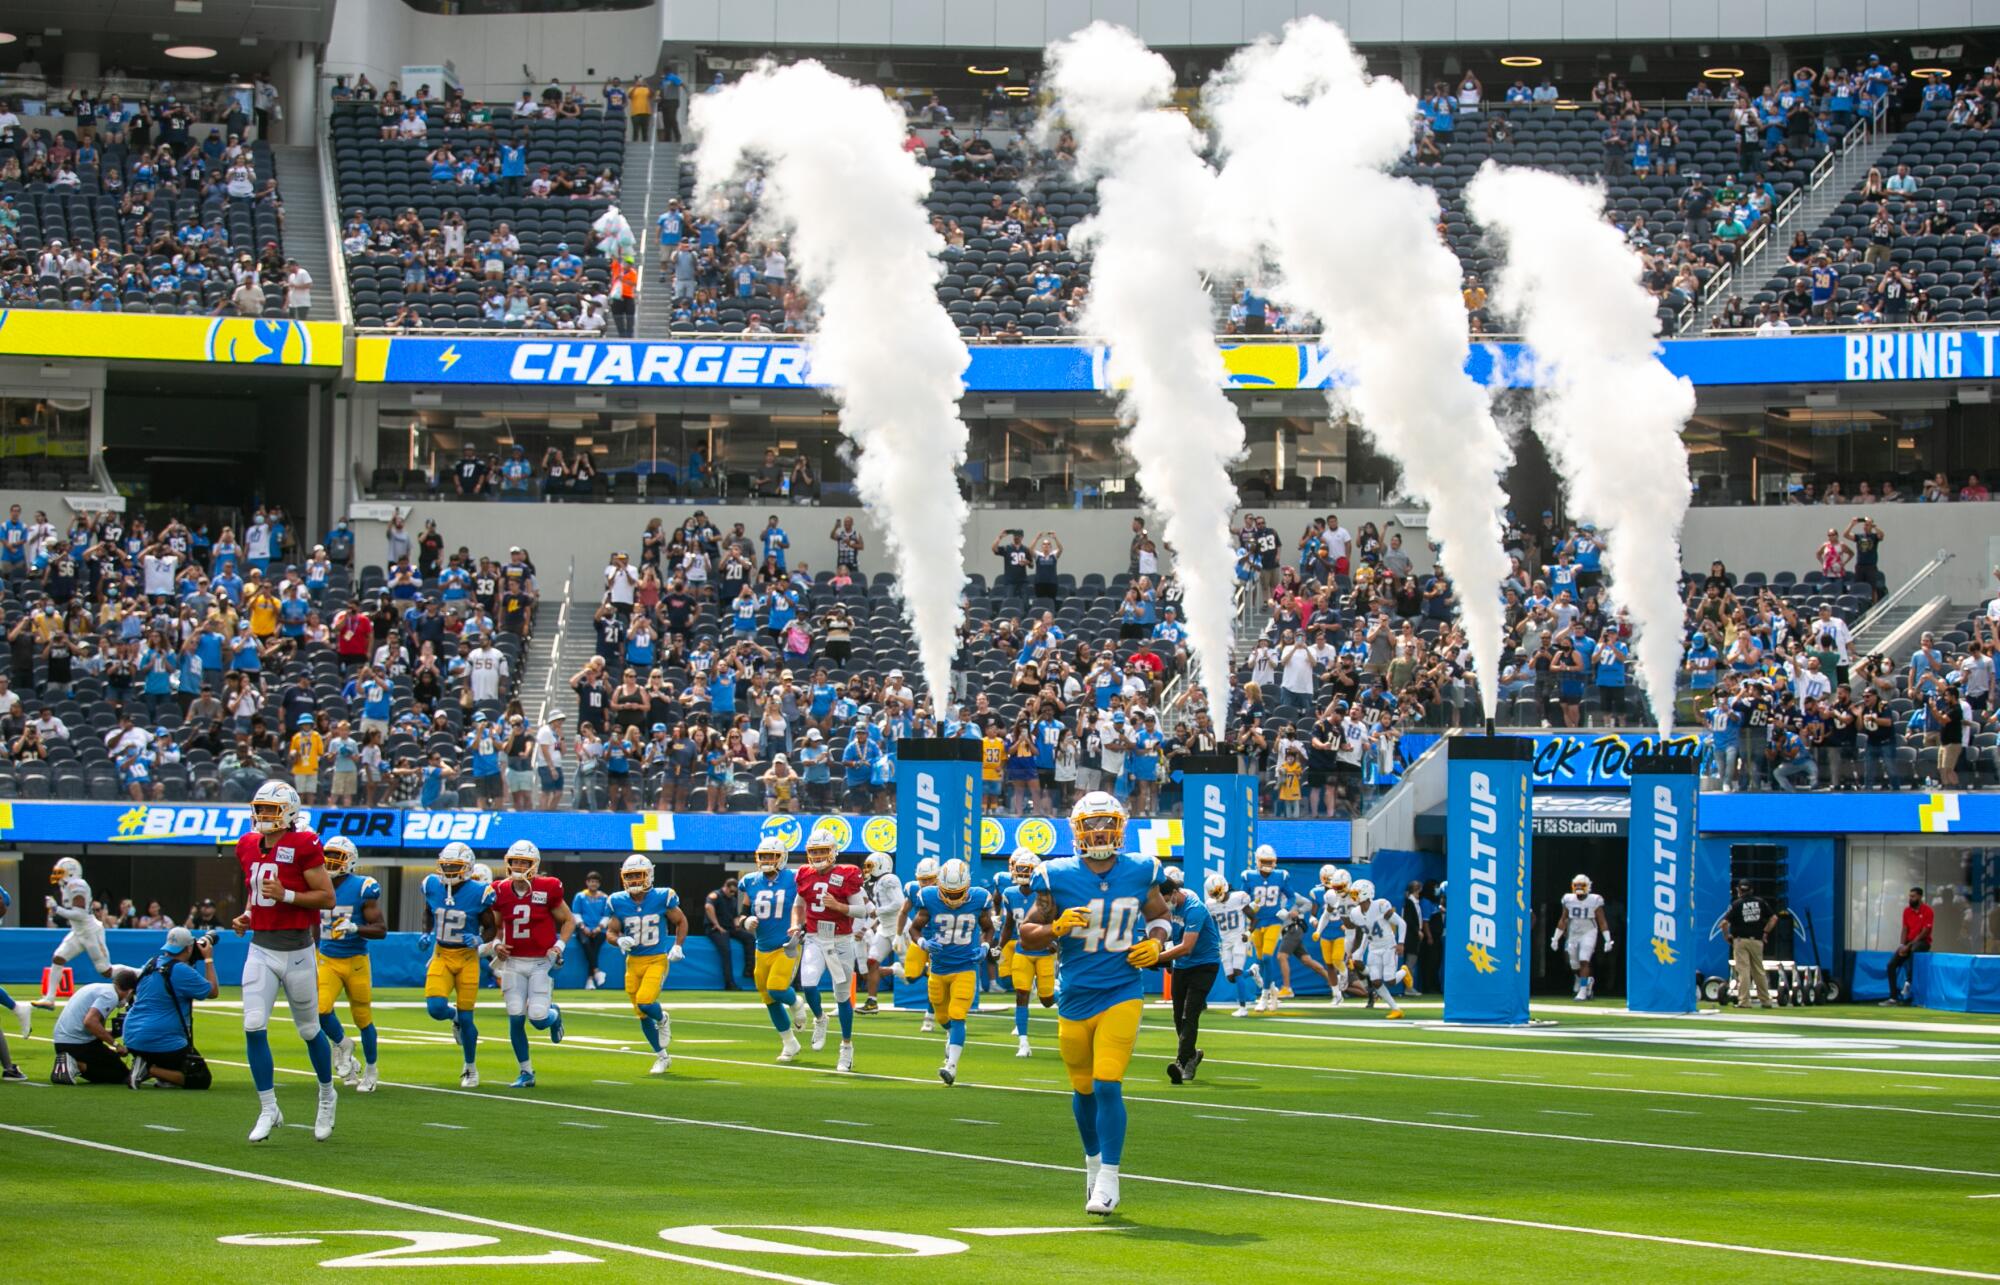 Players enter SoFi Stadium during the Chargers Fan Fest and open practice on Sunday.